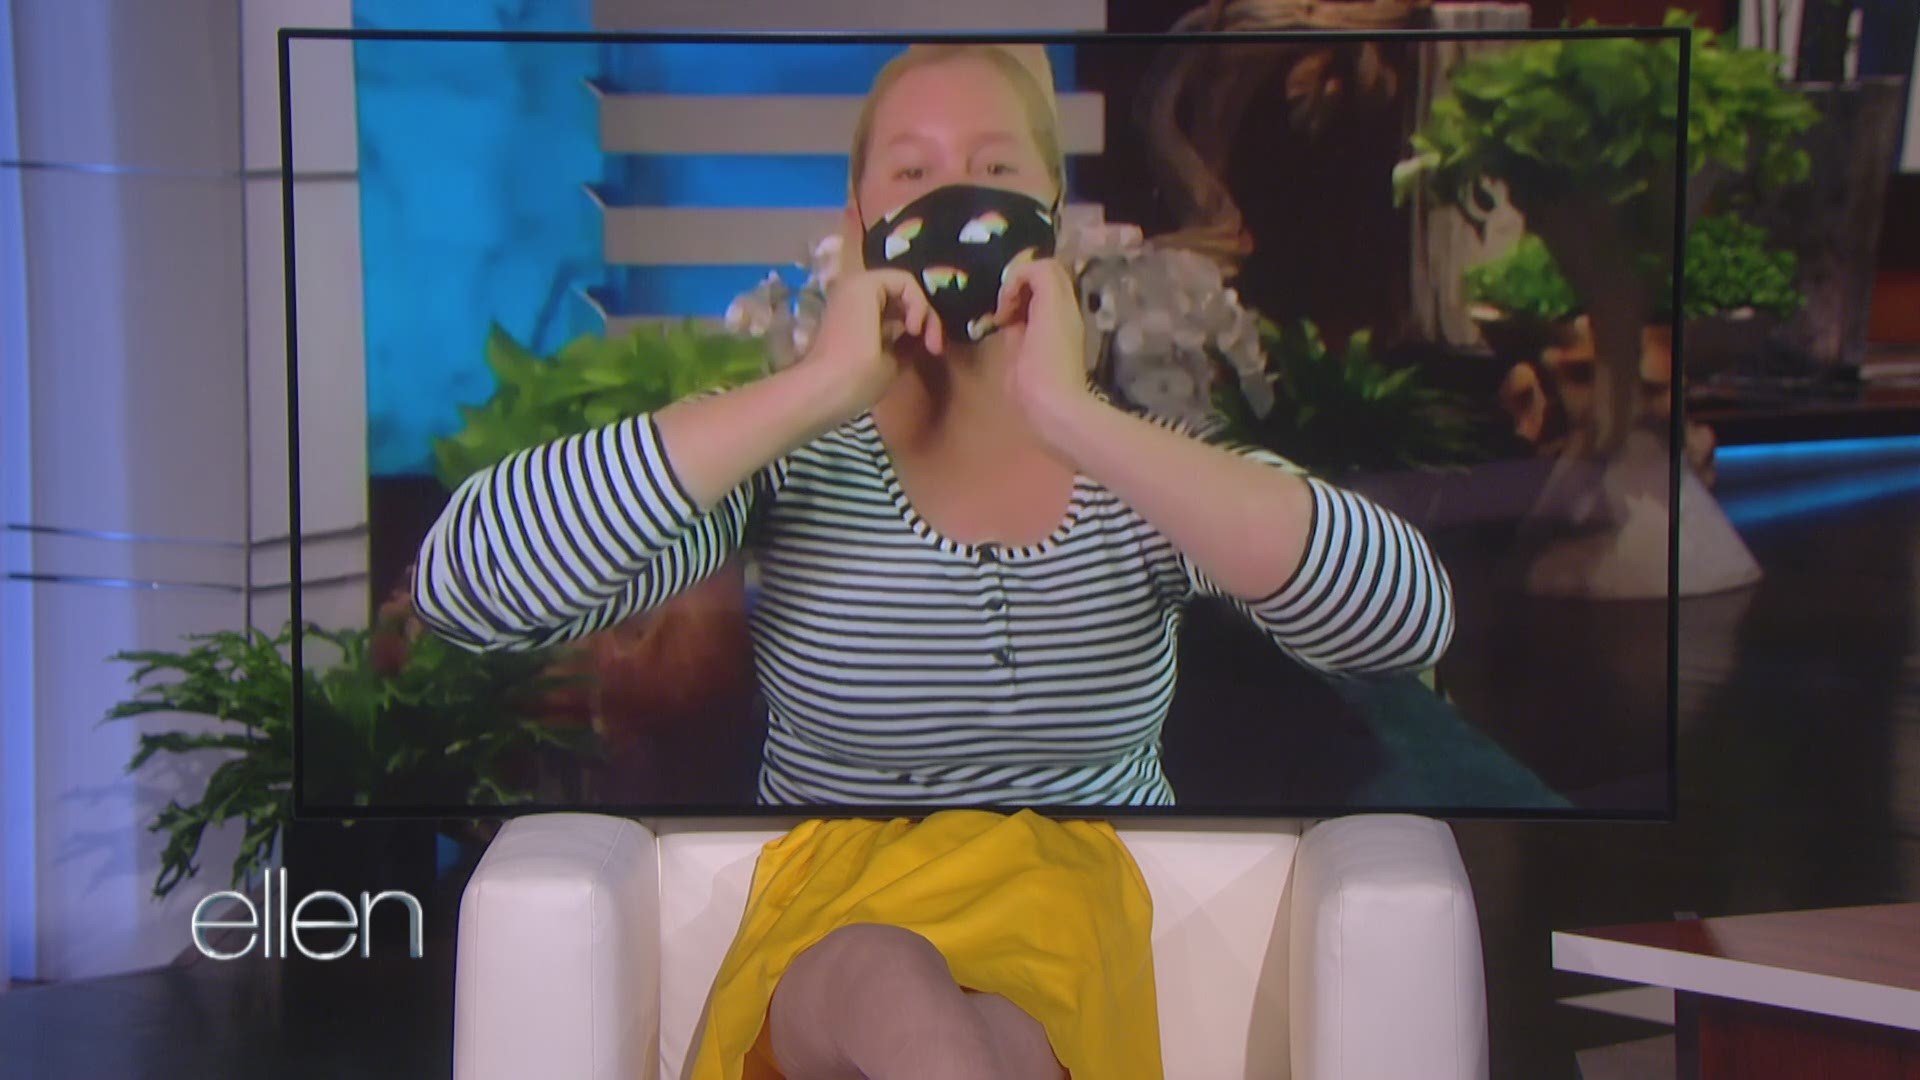 Amy Schumer Makes an Unforgettable 'In-Studio' Appearance